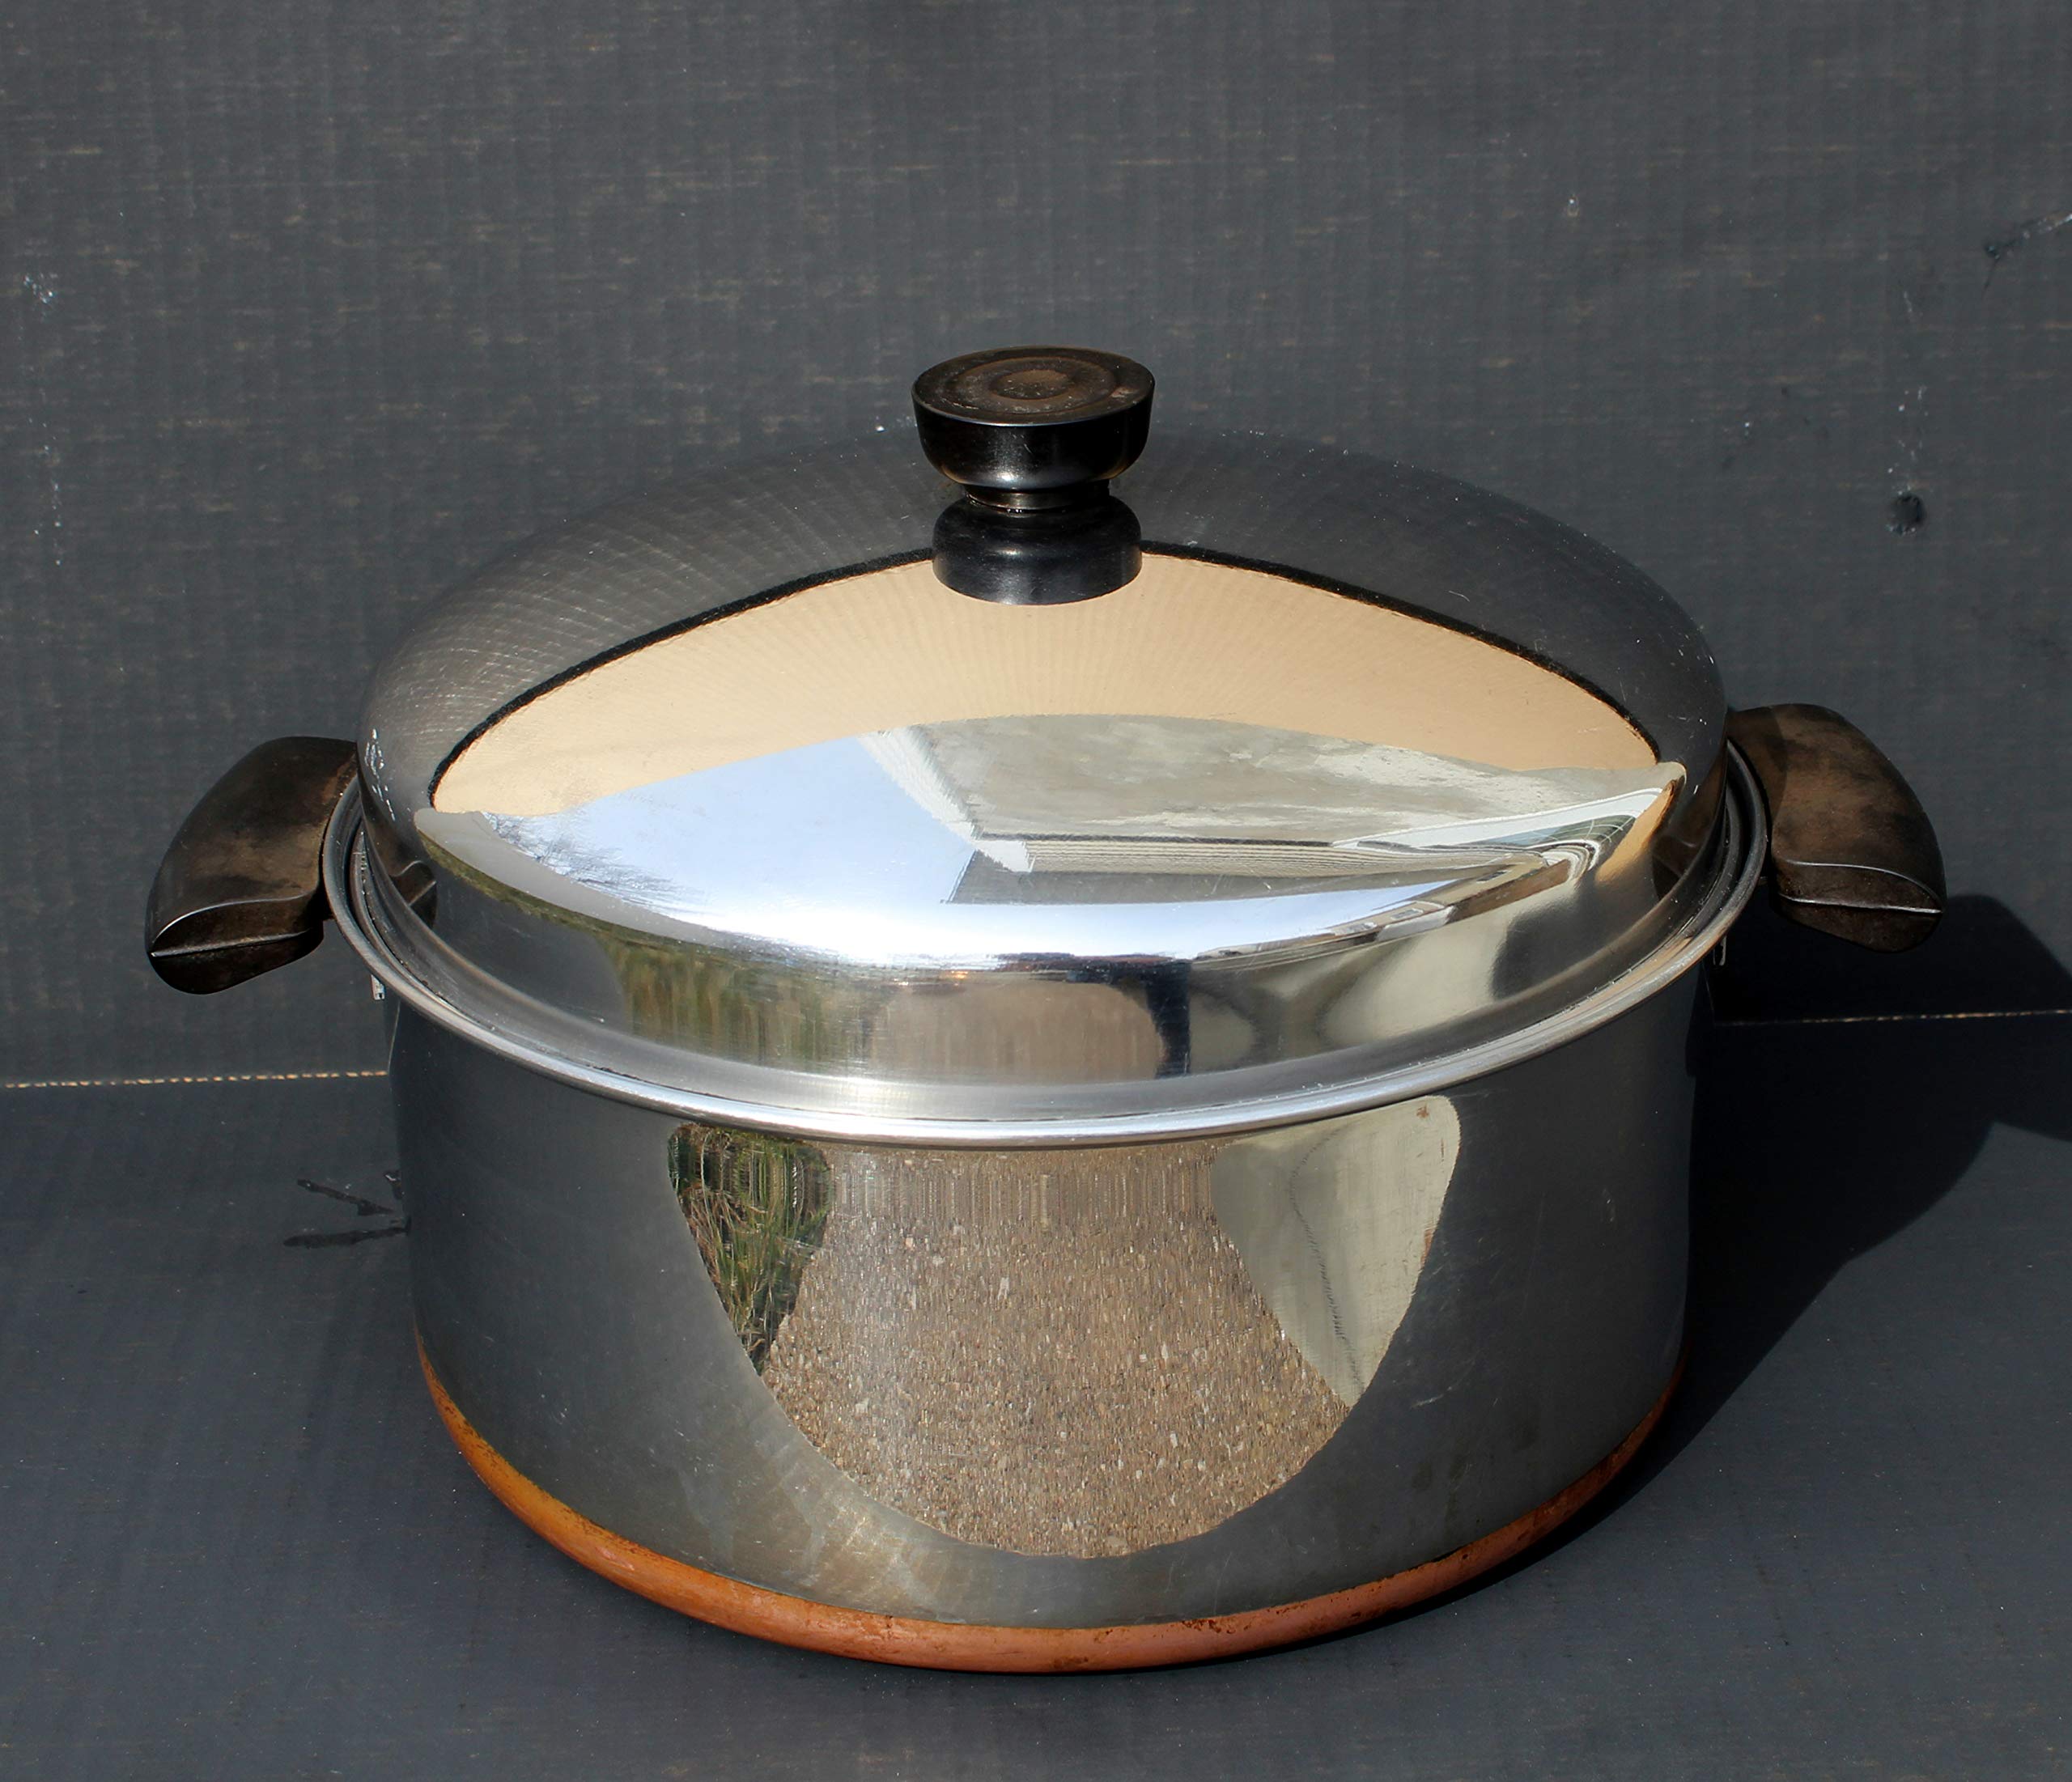 Revere Ware Pre-'68 Double Ring 6 Quart Stainless Steel Copper Bottom Stockpot with Dome Lid